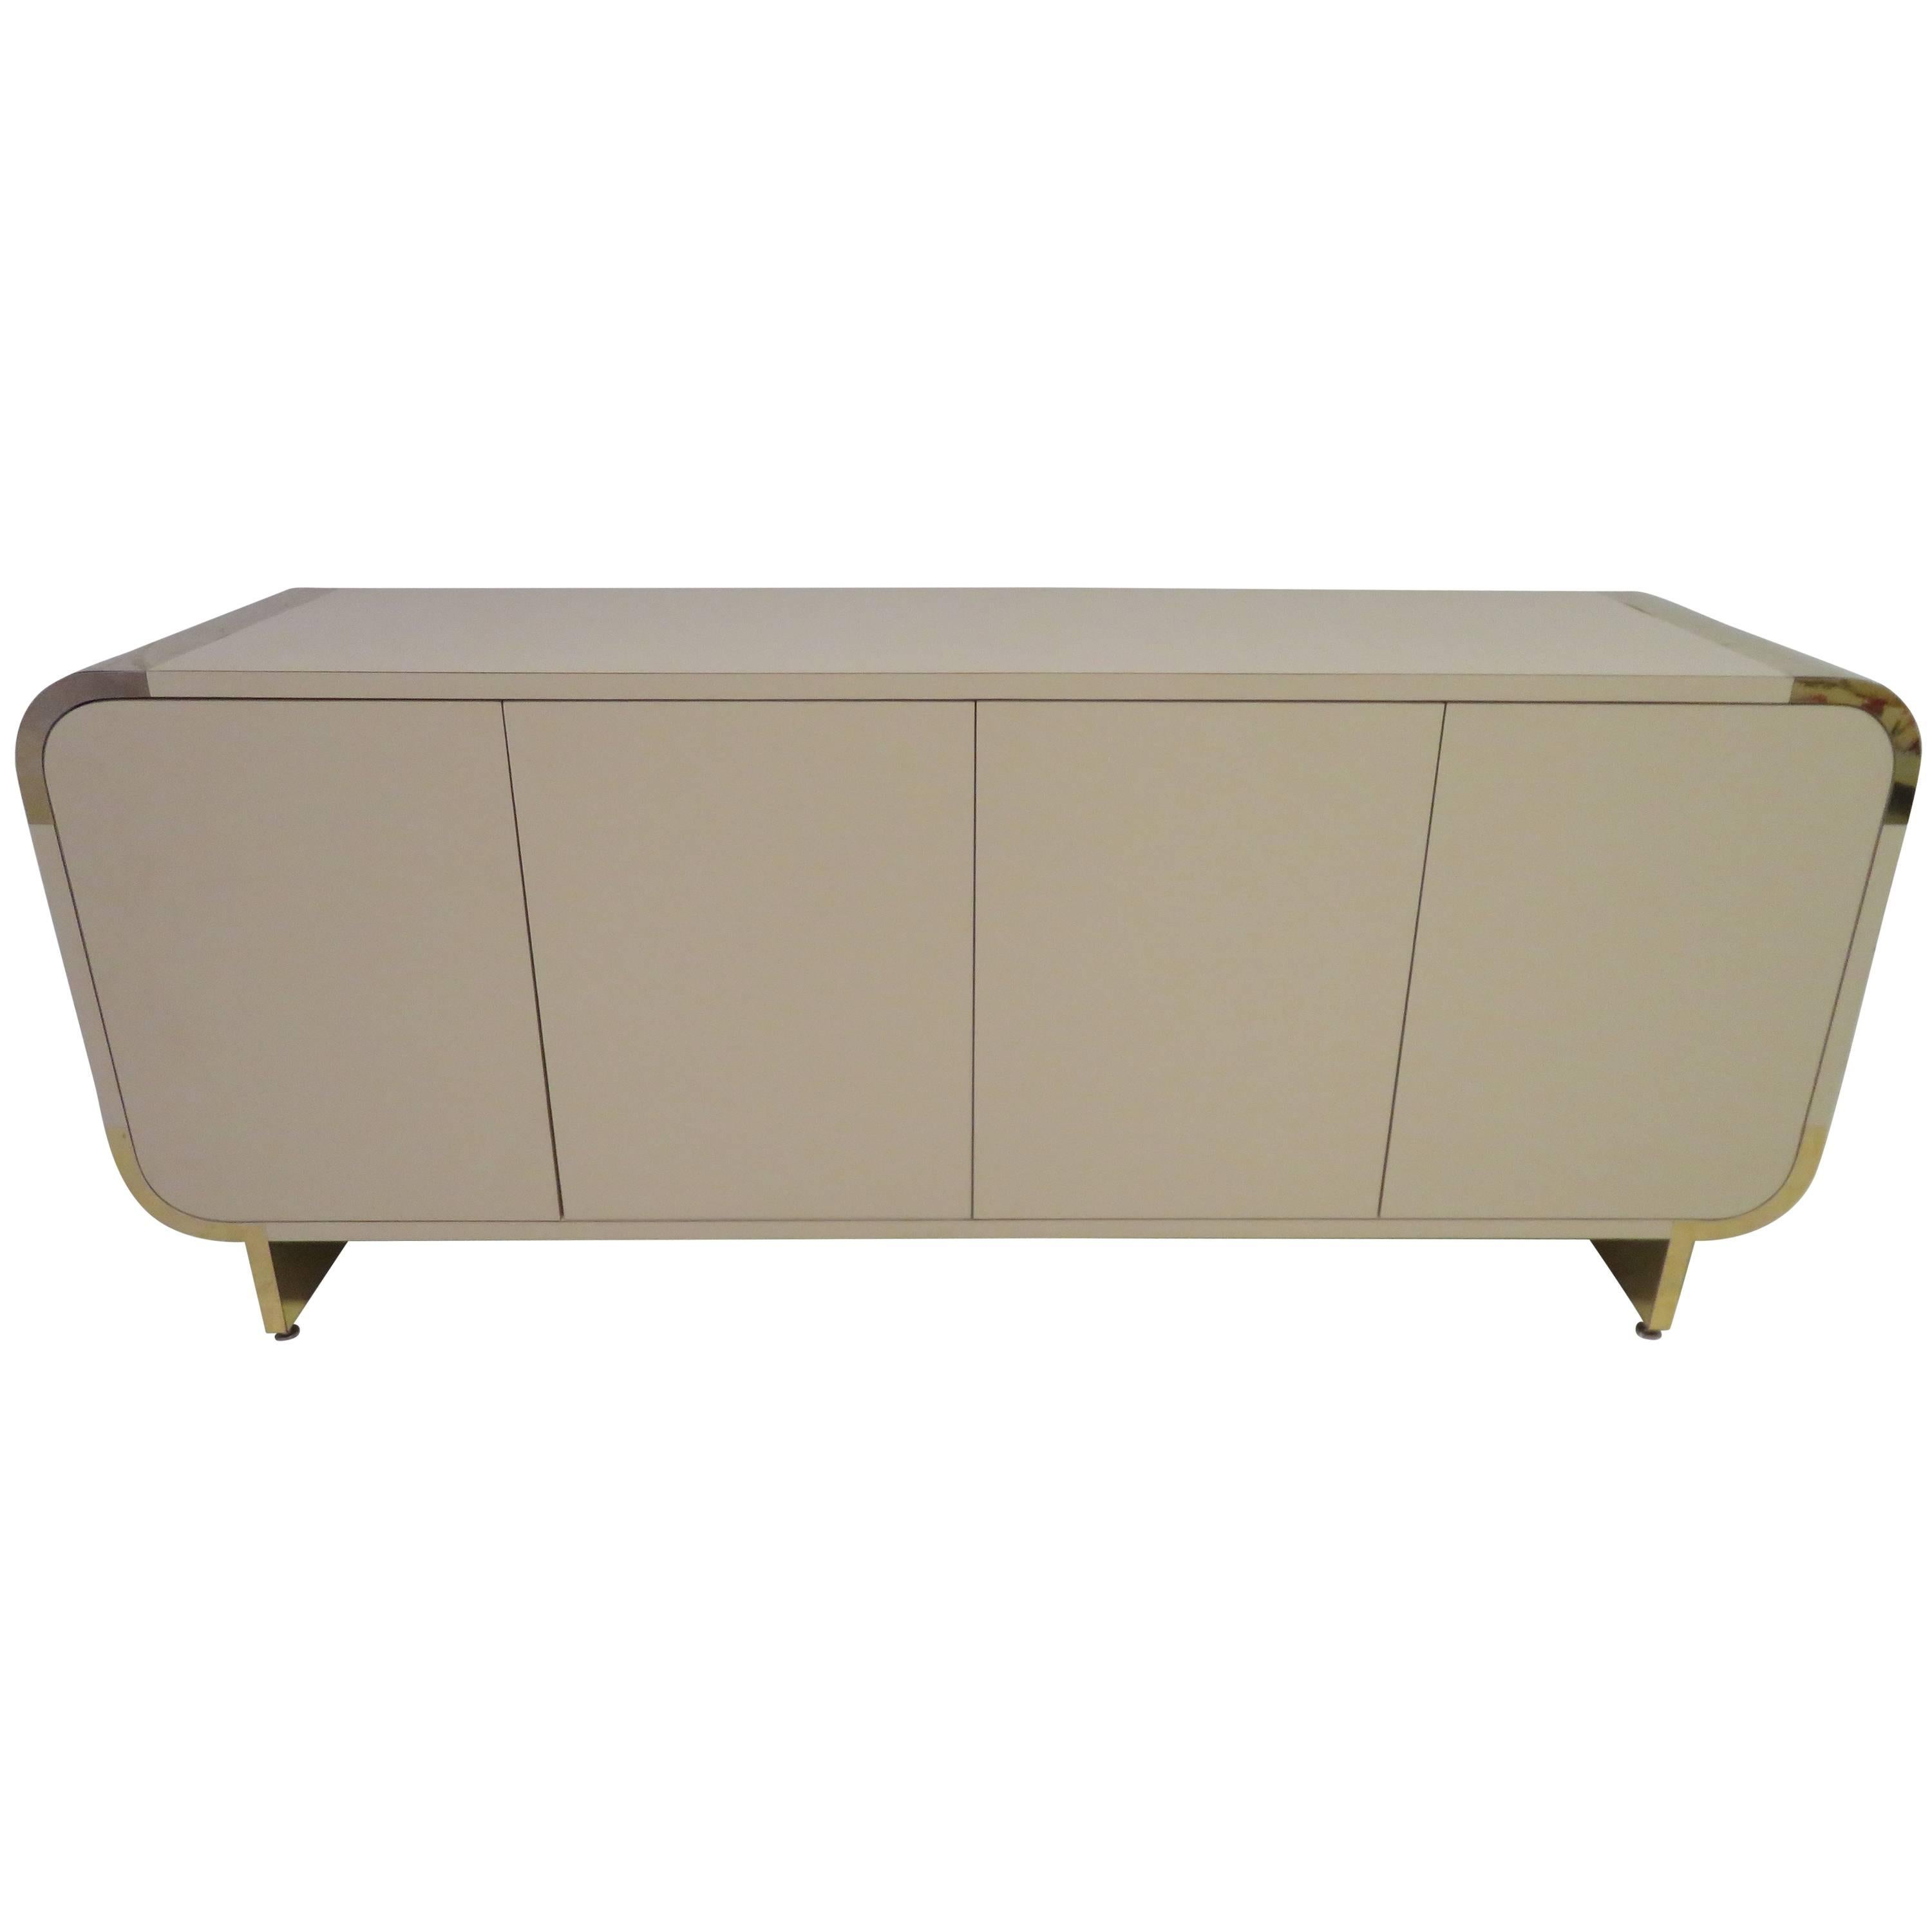 Unusual Pace Collection Curved Edge Credenza, Mid-Century Modern For Sale